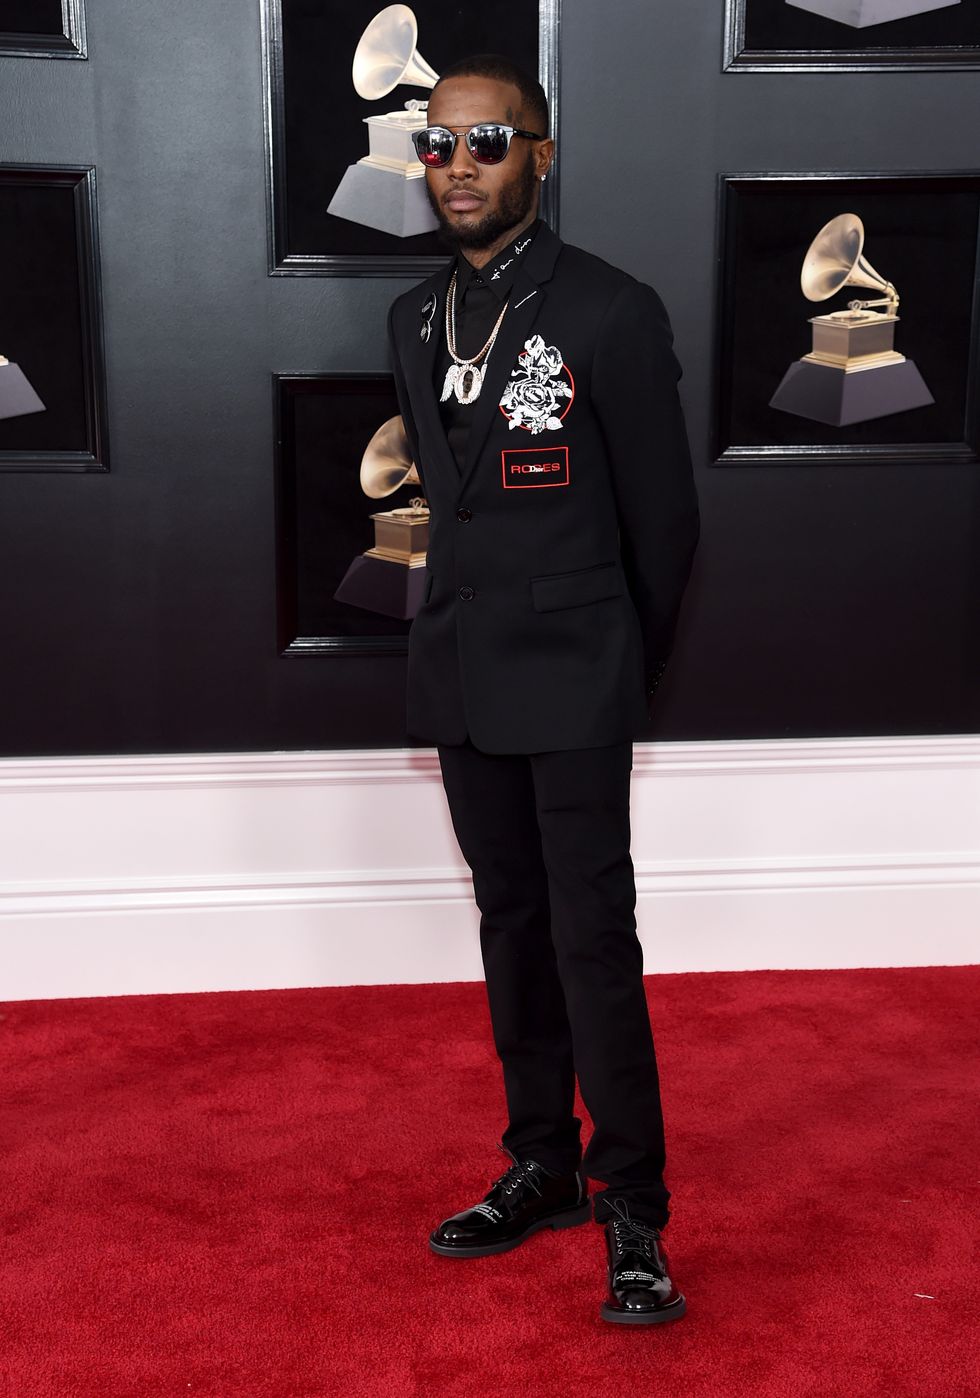 Grammys 2018: The Best (and Most Wildly) Dressed Men